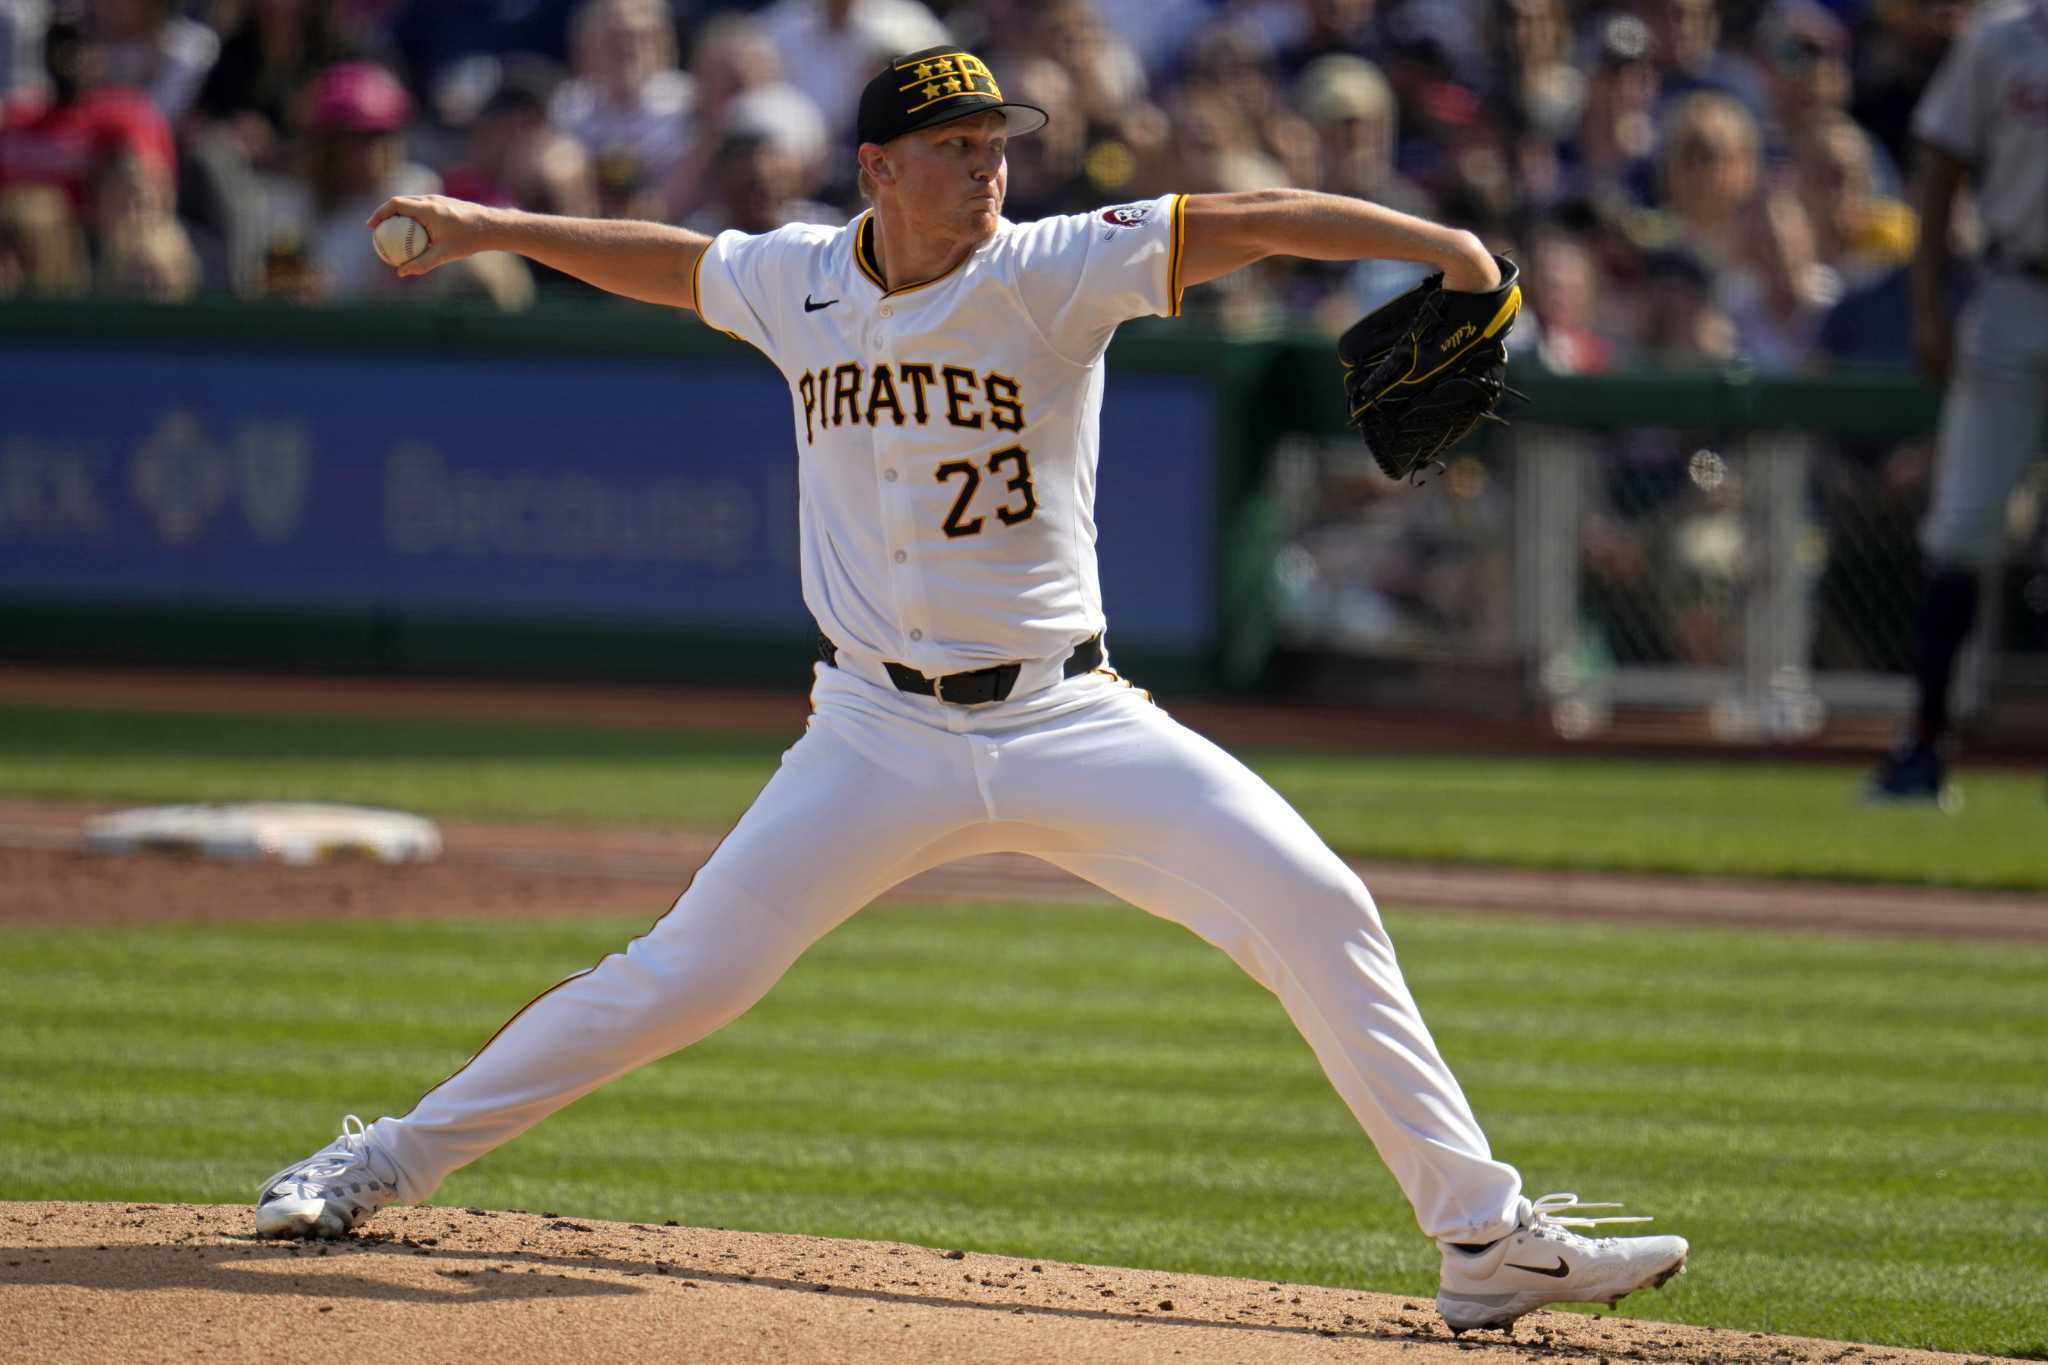 The Pirates pitching staff began the season as a question mark. It's becoming an exclamation point